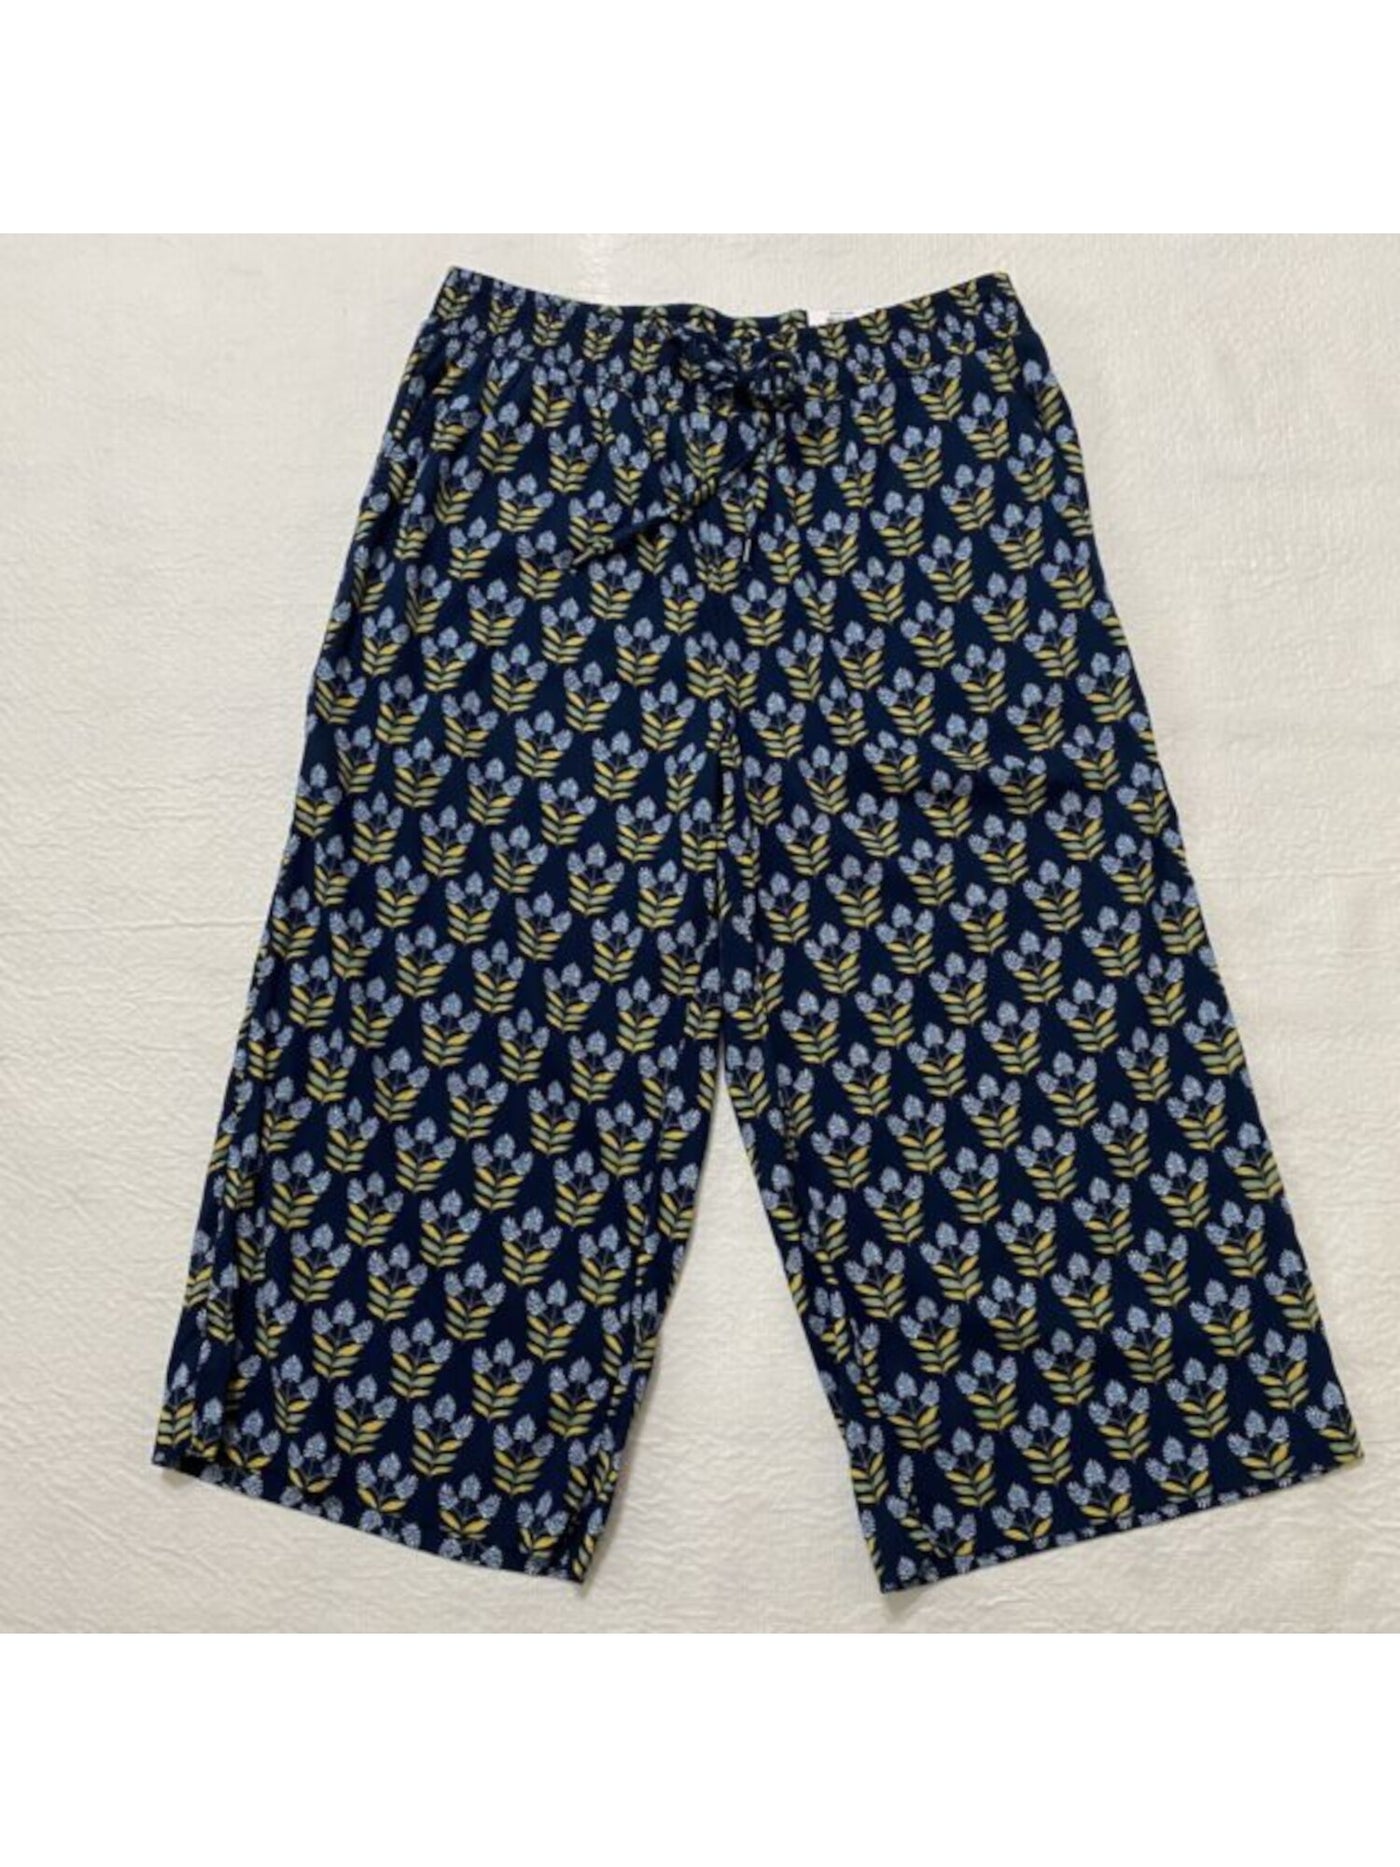 STYLE & COMPANY Womens Navy Cotton Blend Printed Cropped Pants S